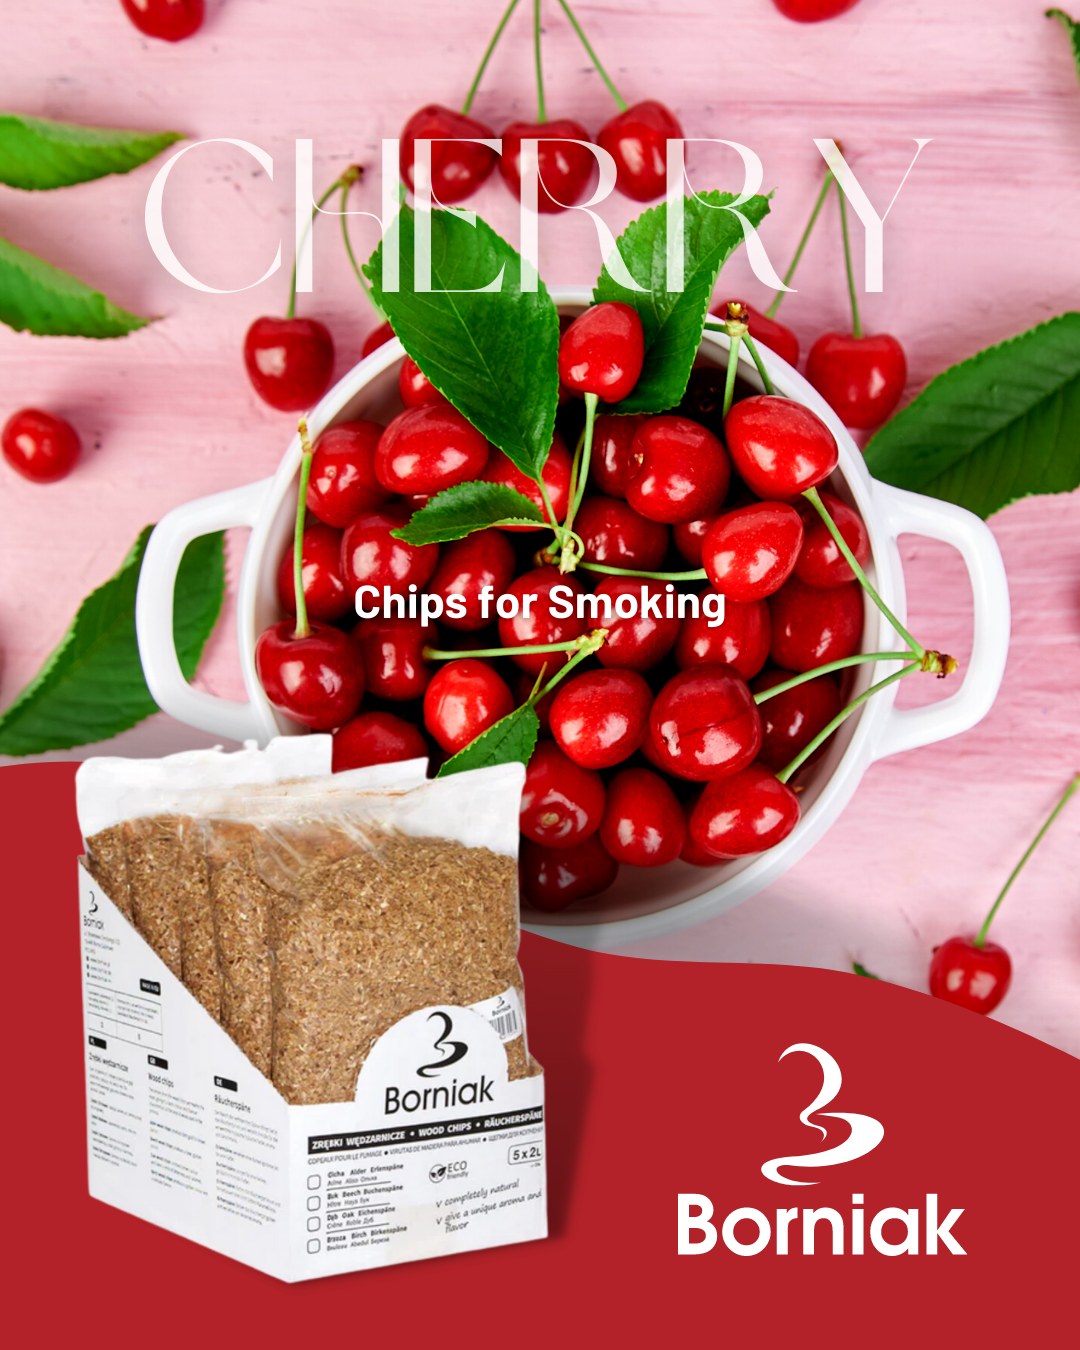 Borniak Smoking Chip - Cherry Wood chips for smoking from